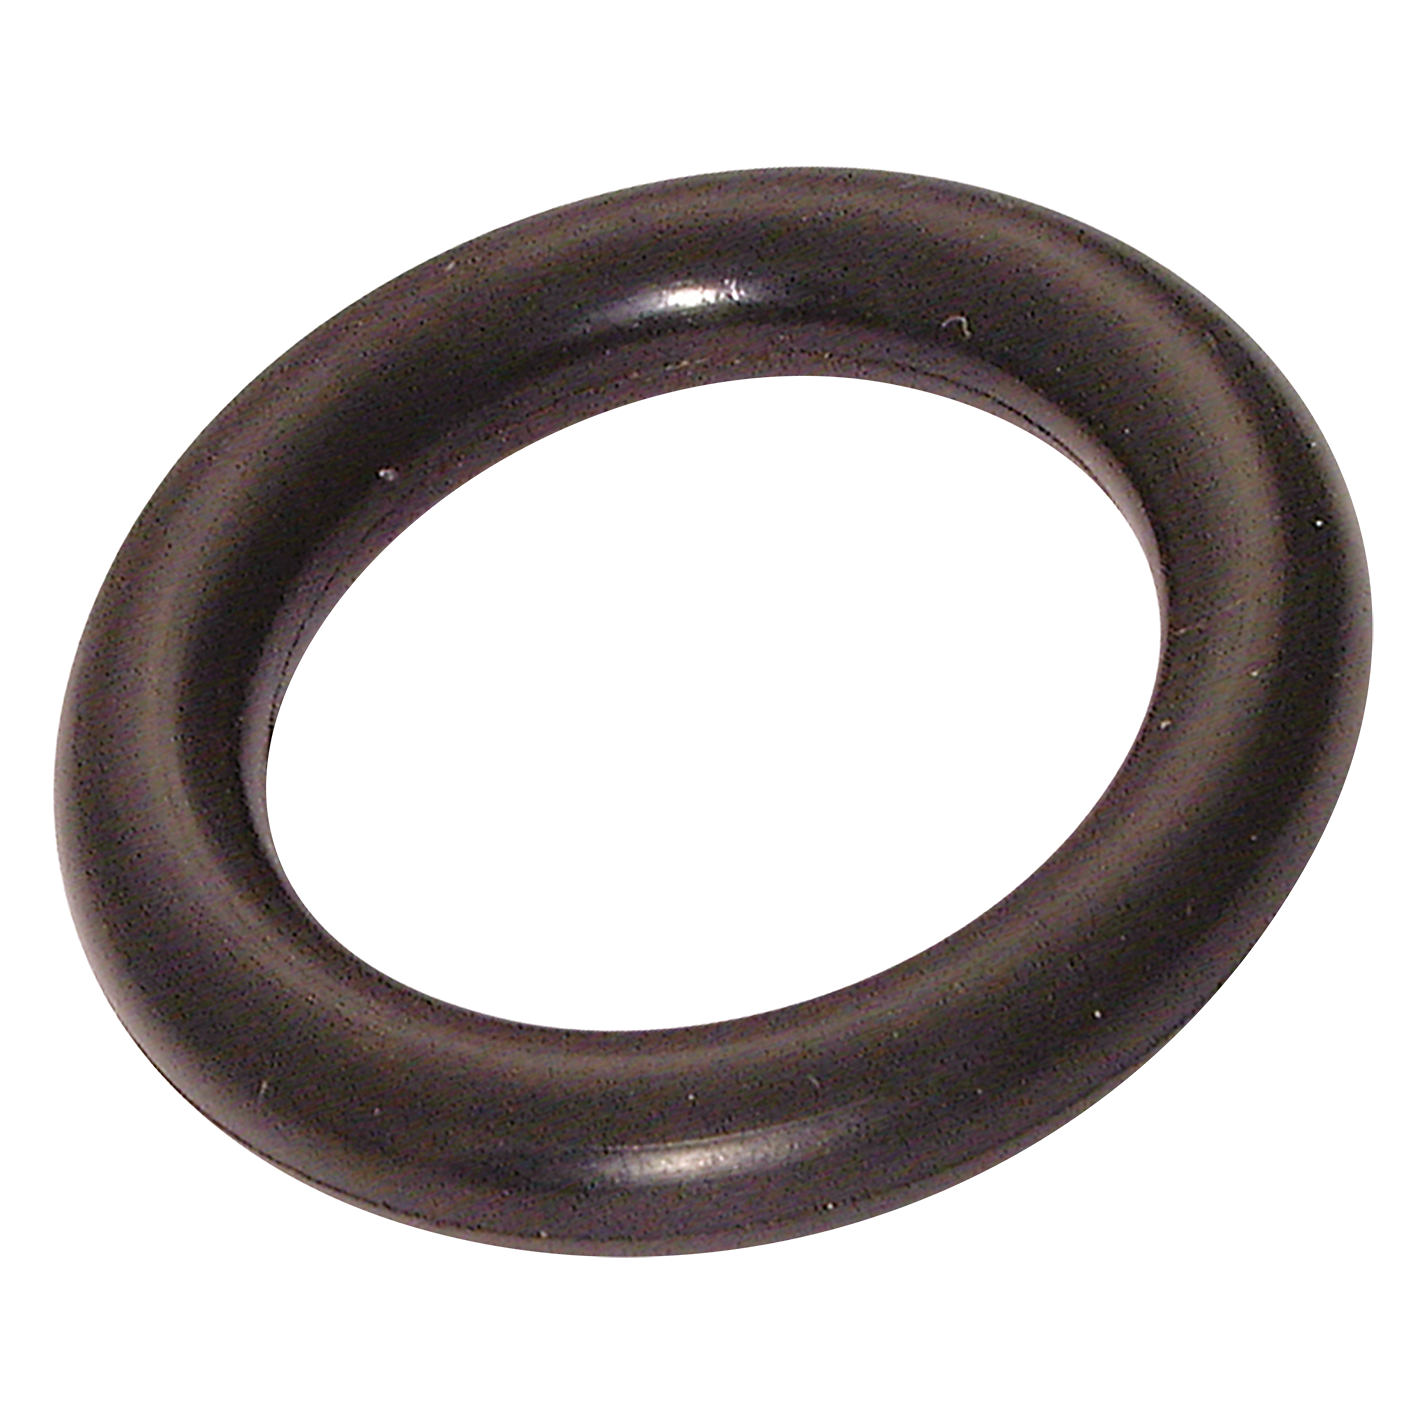 1.1/2" SIZE RJT RUBBER SEAL